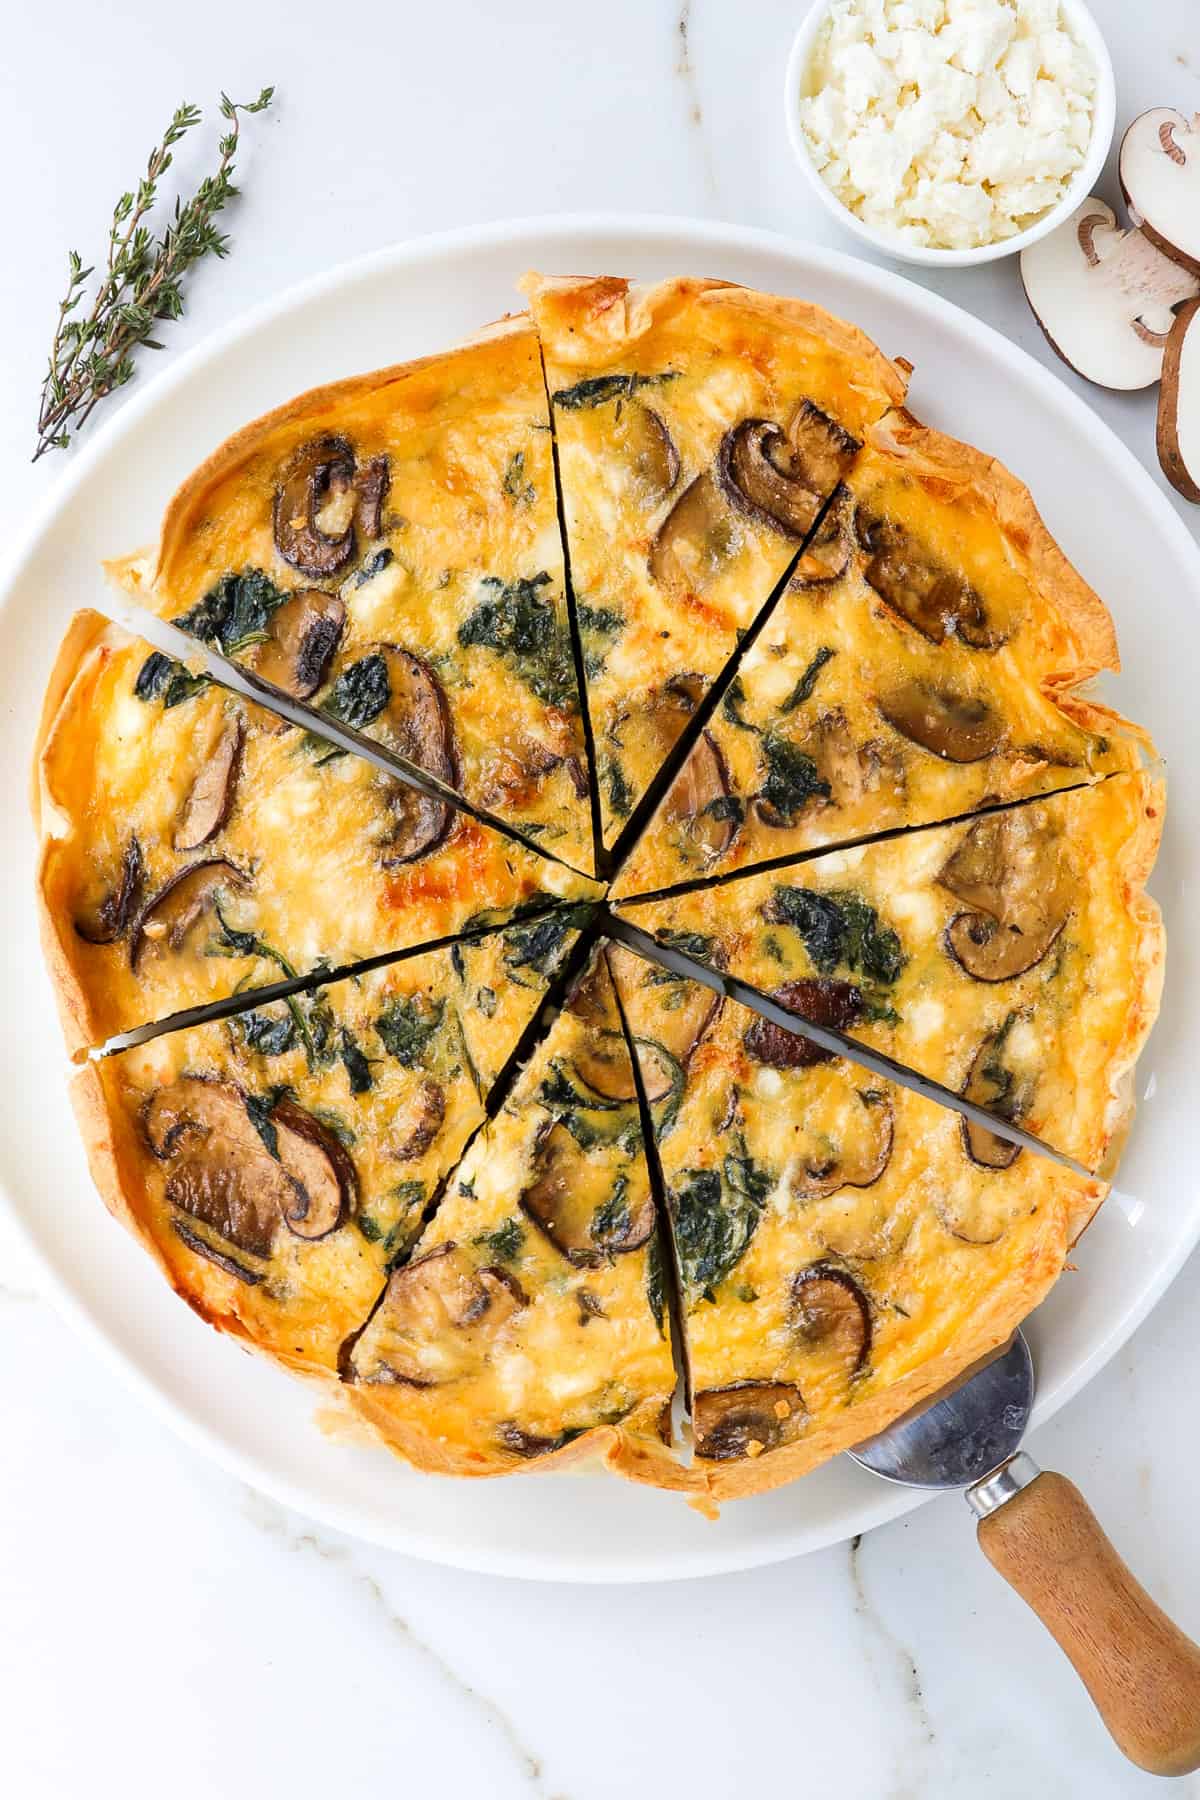 Spinach mushroom quiche on a plate with a wooden spatula.